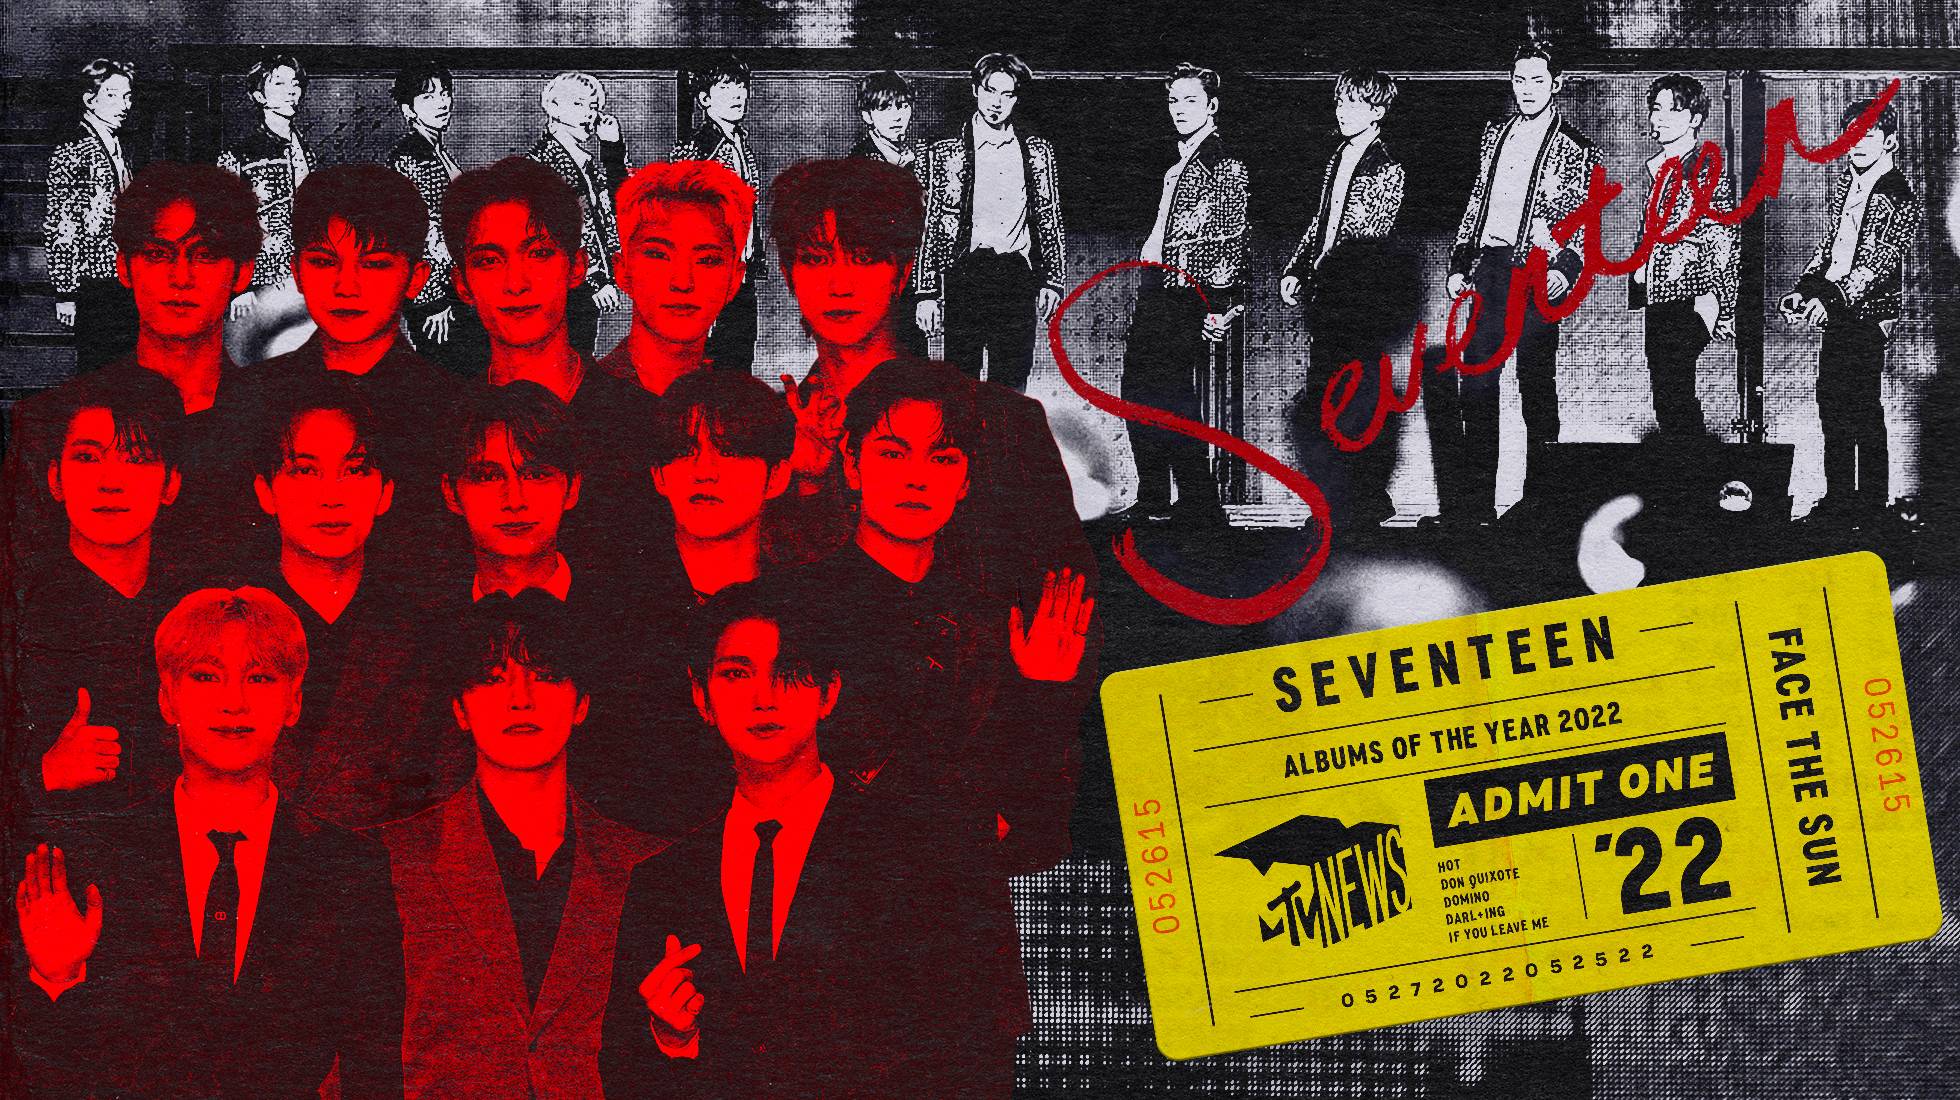 A stylized treatment of the group Seventeen